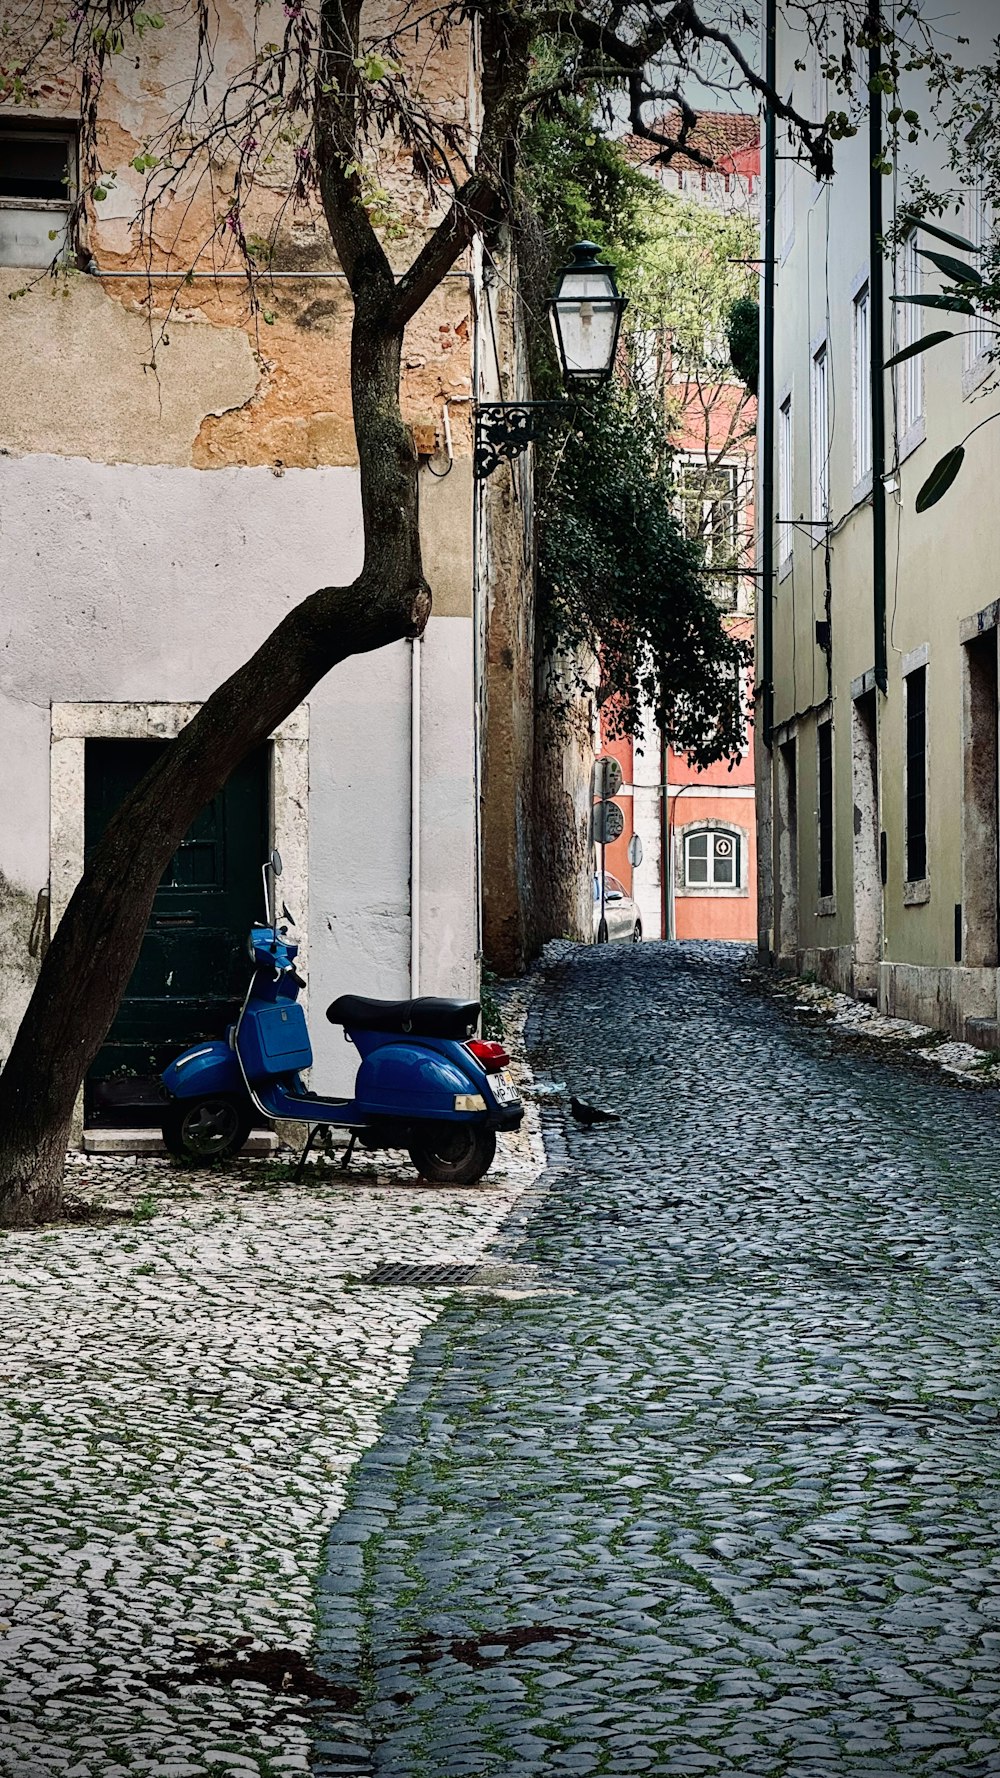 a motor scooter parked on a cobblestone street